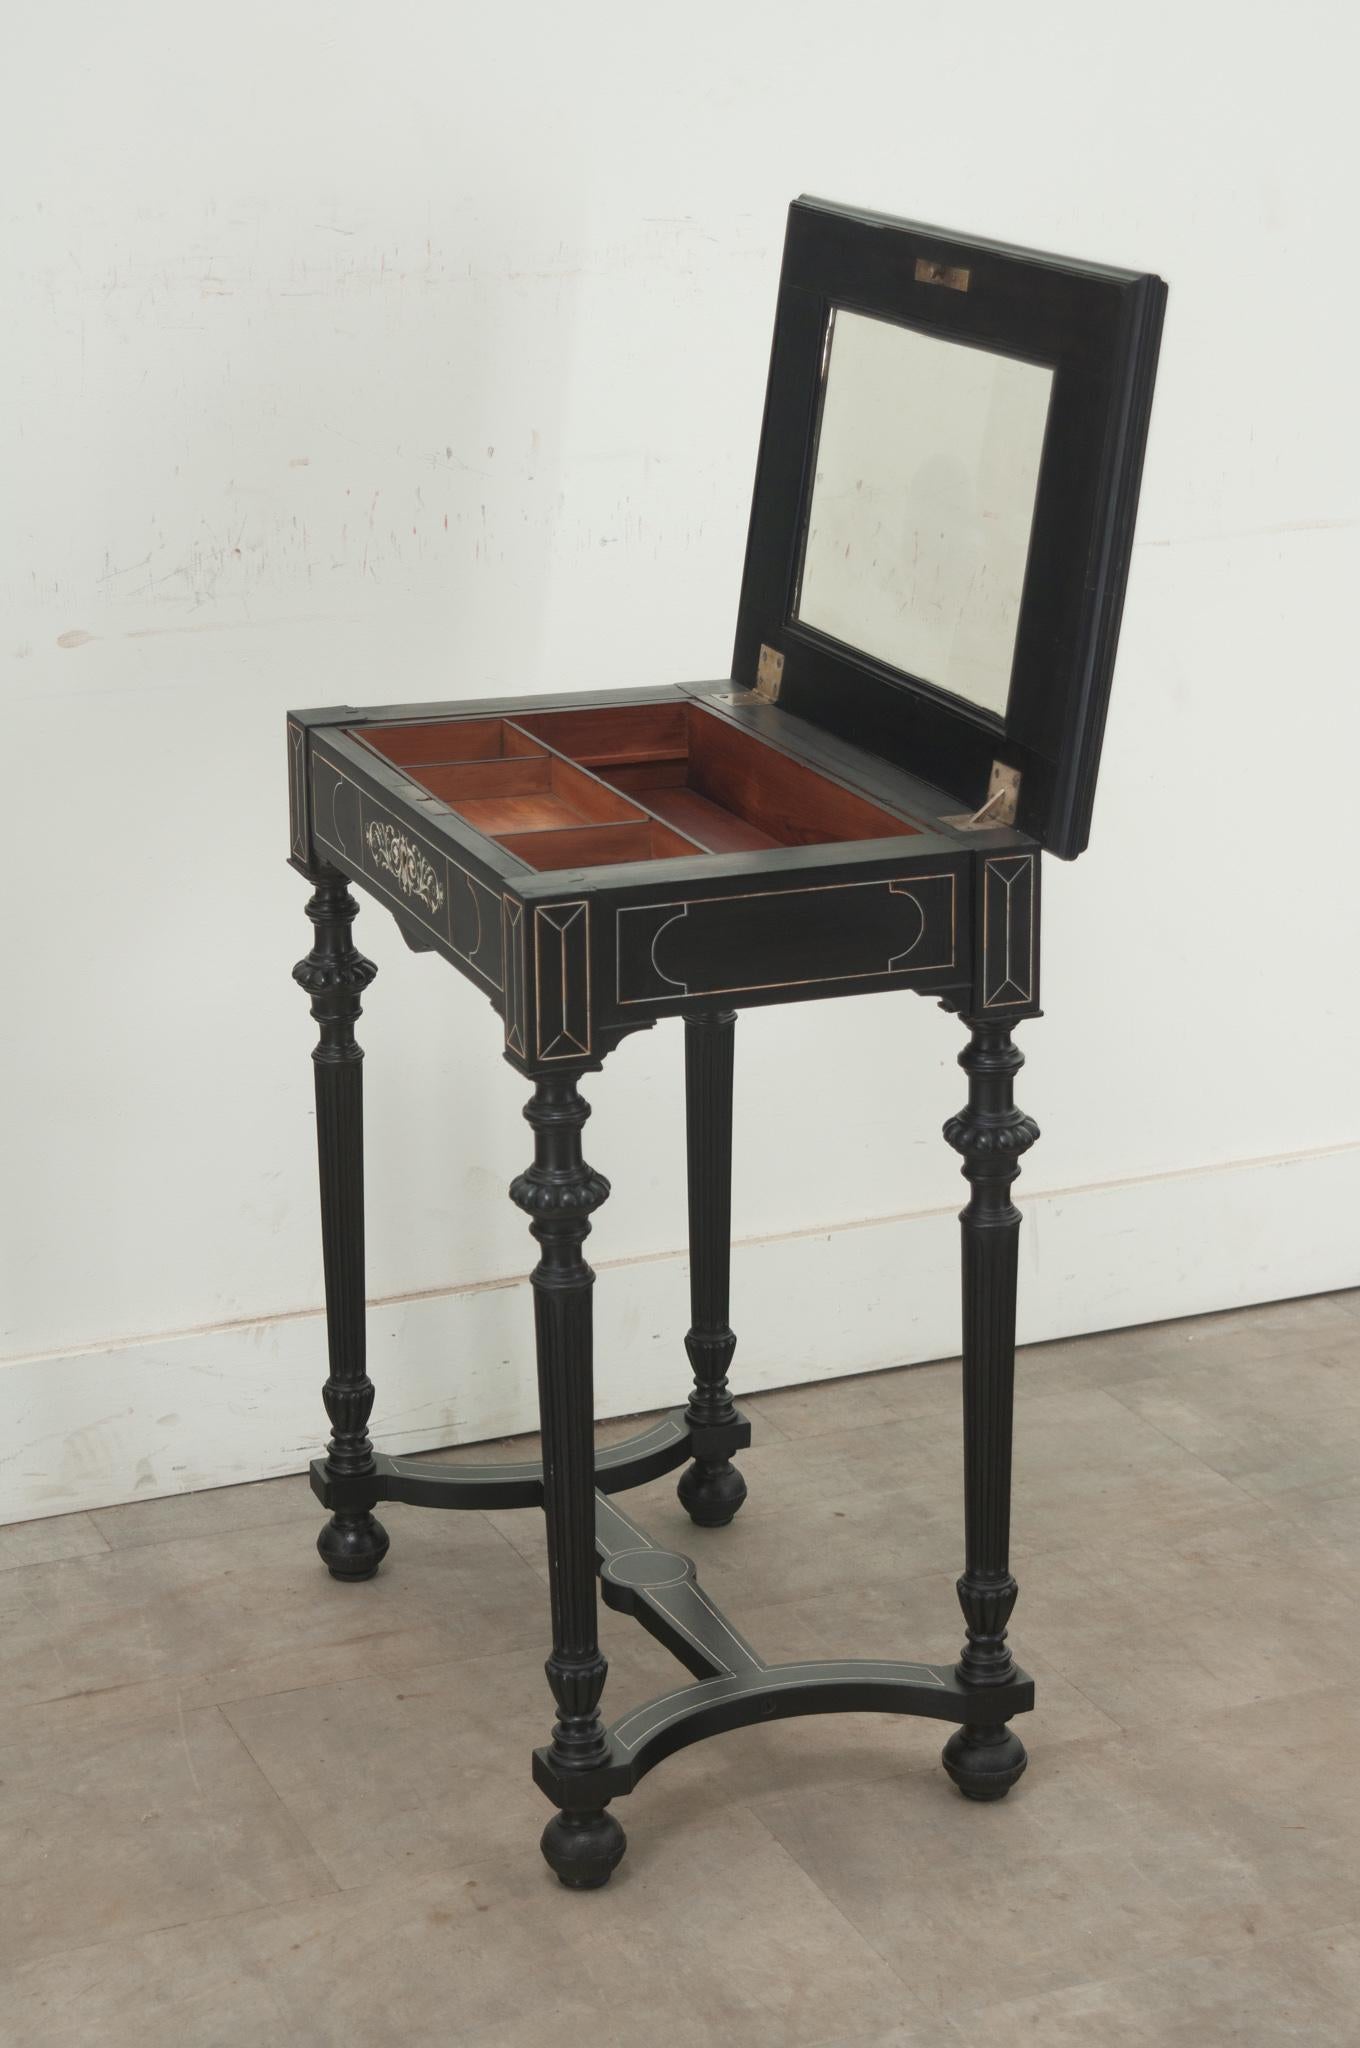 An ebonized and bone inlay petite vanity from the 1800’s, France. The vanity top is connected with brass hinges and opens to reveal an inset mirror. The base is fitted with a removable and sliding tray over a drawer. You’ll find intricate bone inlay